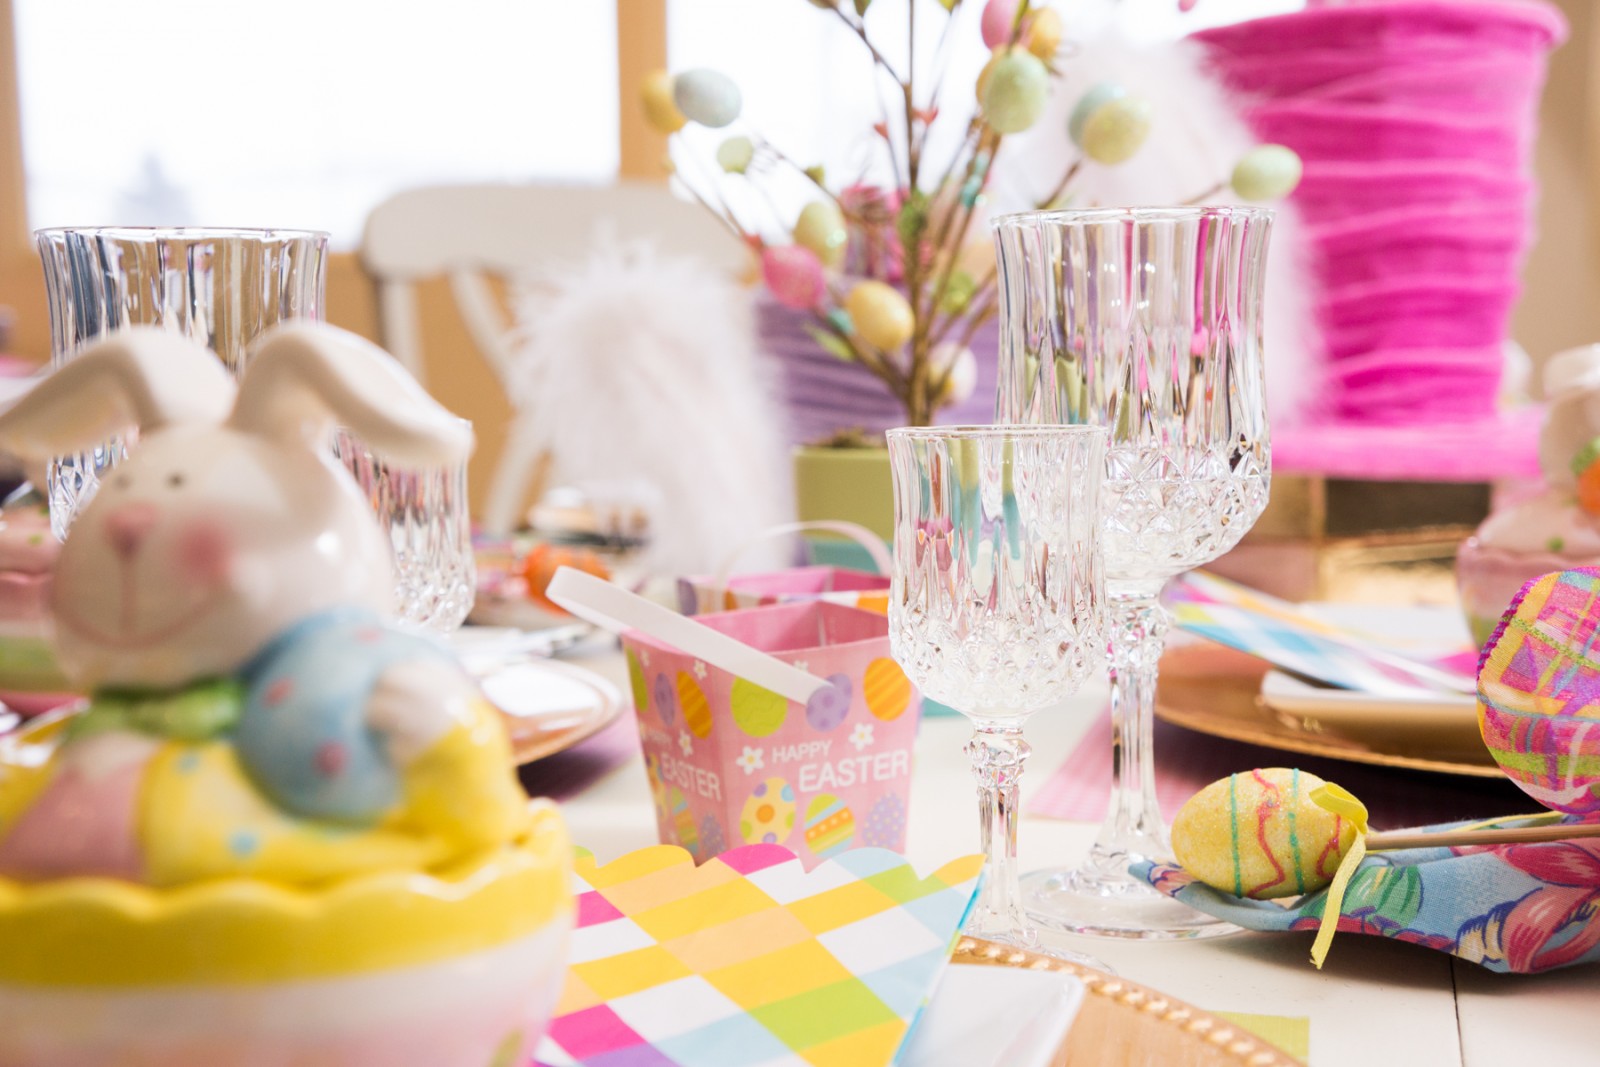 Easter table setting with festive bunny figurines.